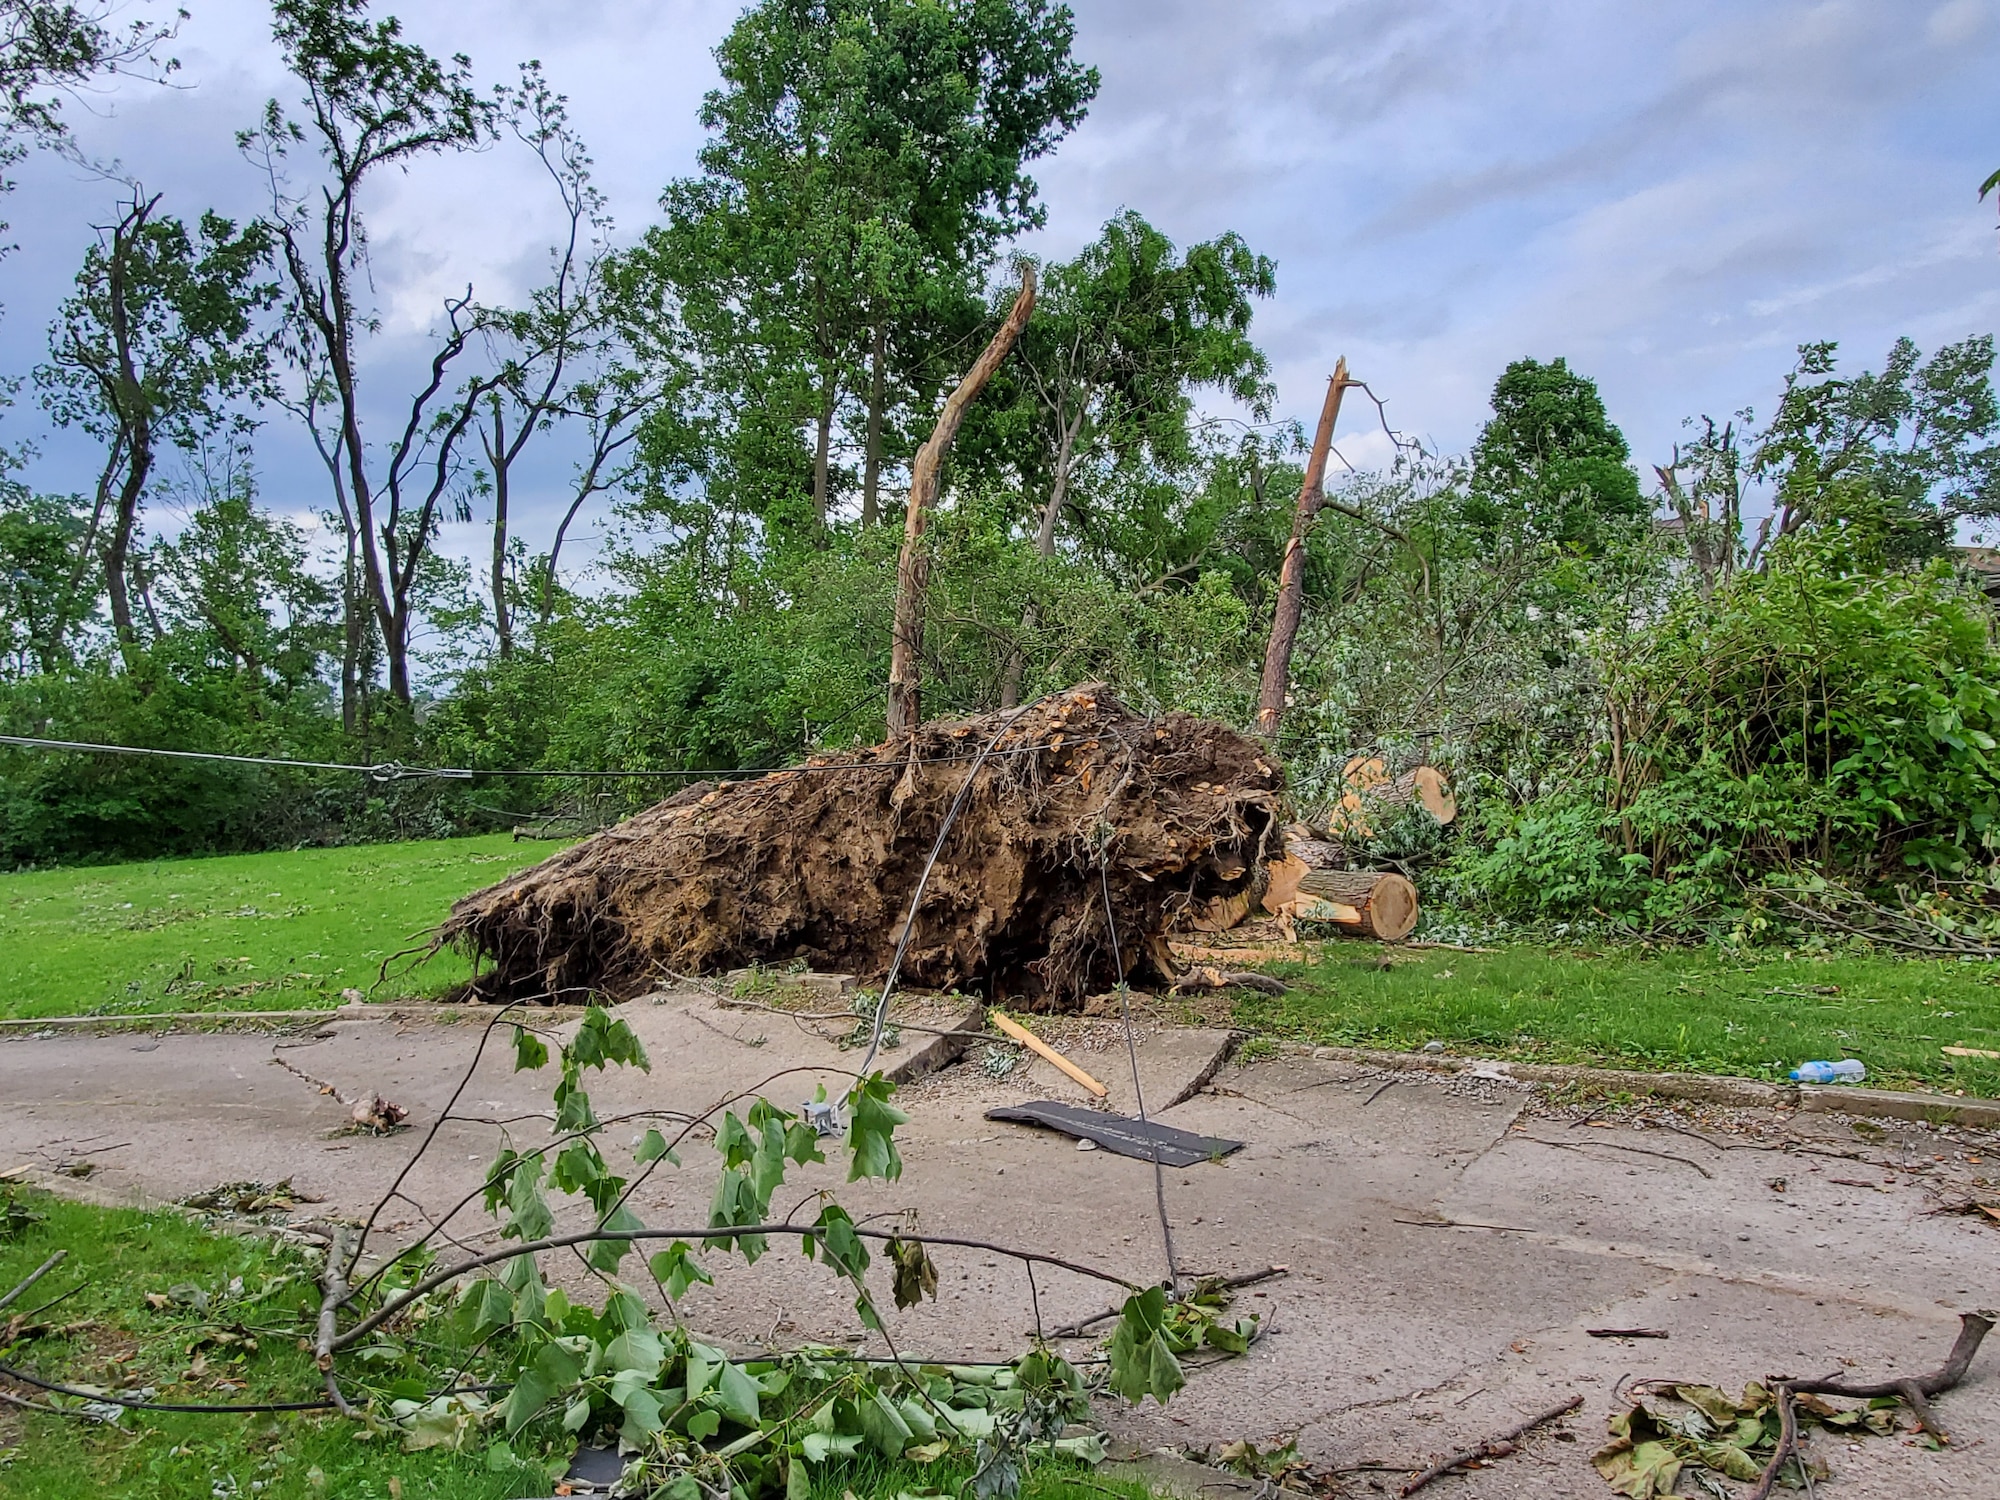 Air Force Research Laboratory employees helped others in need of assistance after multiple tornadoes struck areas surrounding Wright-Patterson Air Force Base during the evening of Memorial Day 2019. Trees were uprooted, roofs were torn off, and in some cases, entire structures were destroyed by the storms. (U.S. Air Force Photo/ Capt. Evan McDowell)